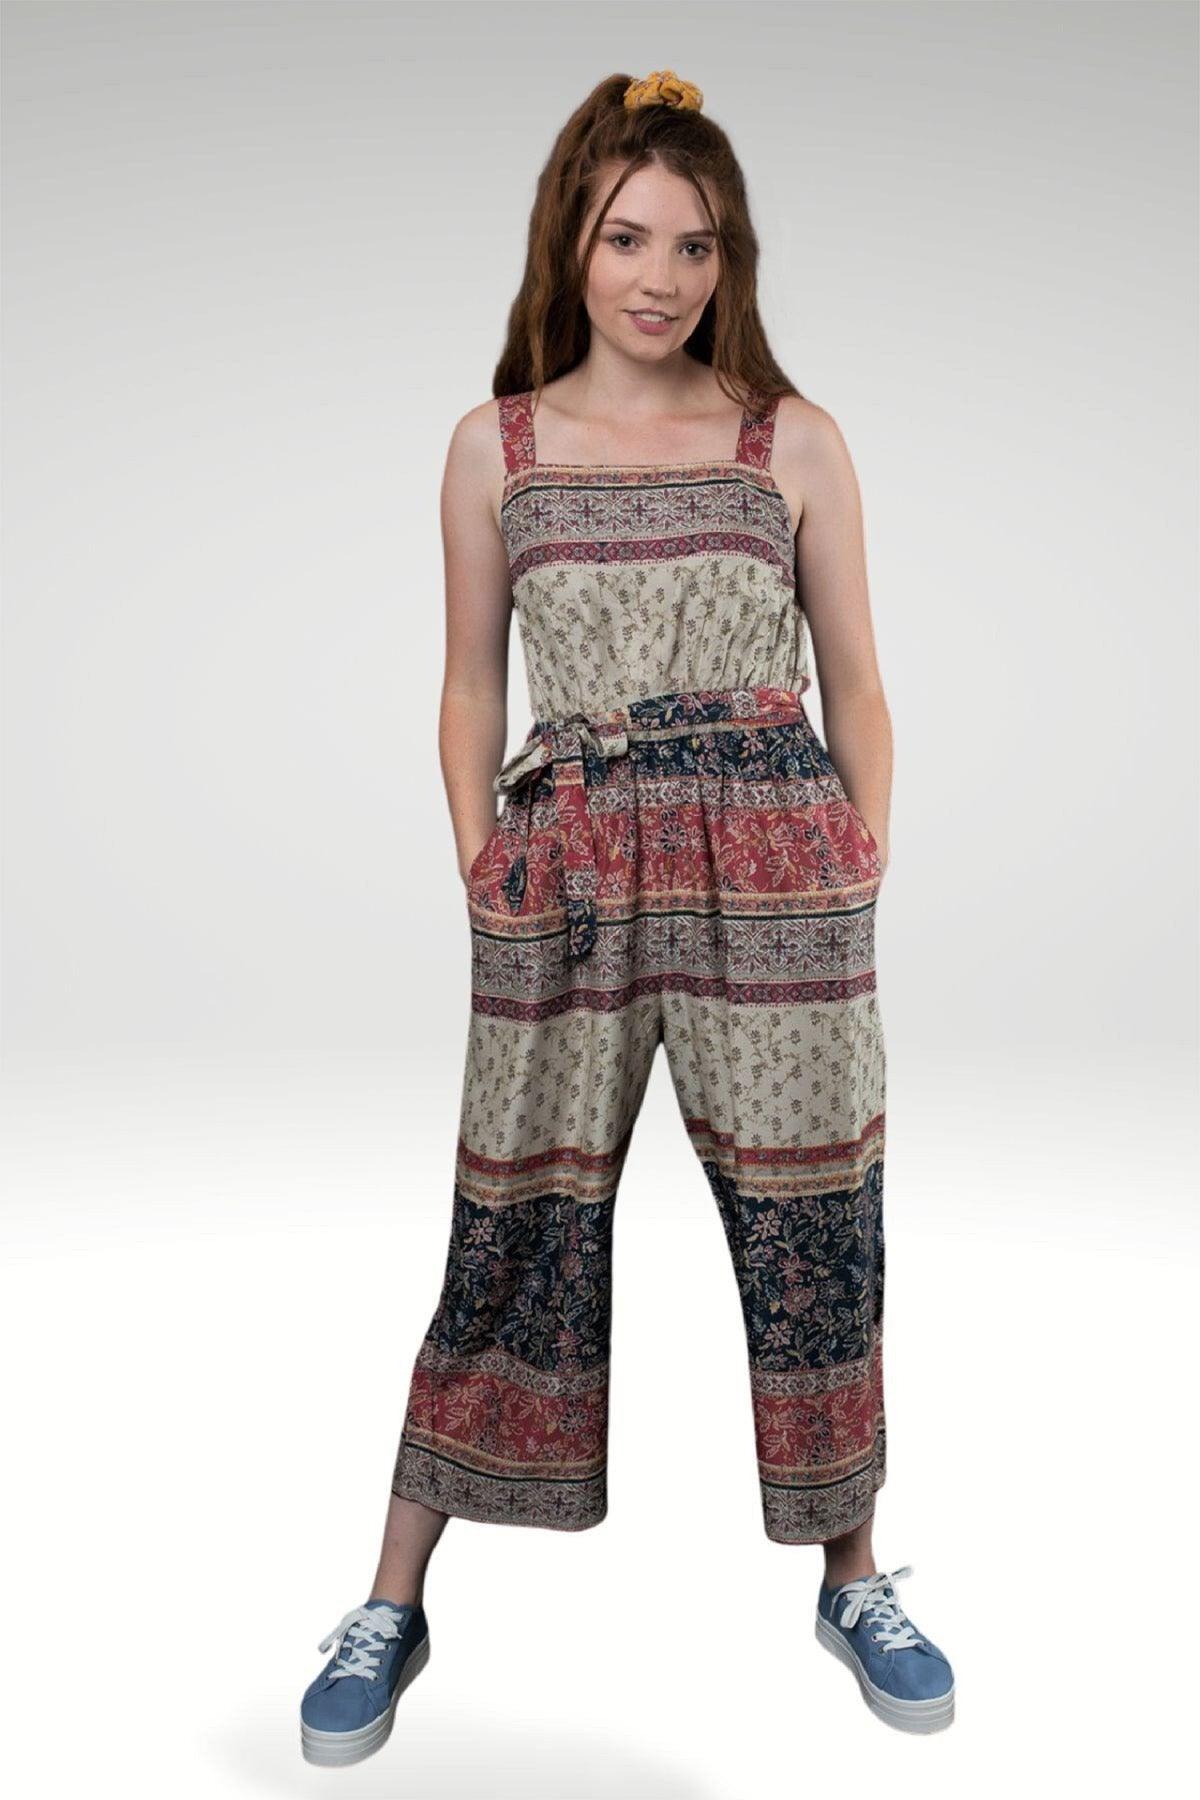 NIKI PRINTED JUMPSUIT IN EARTHY RICH TONES- FRONT VIEW ON THE MODEL WITH HANDS IN THE POCKETS